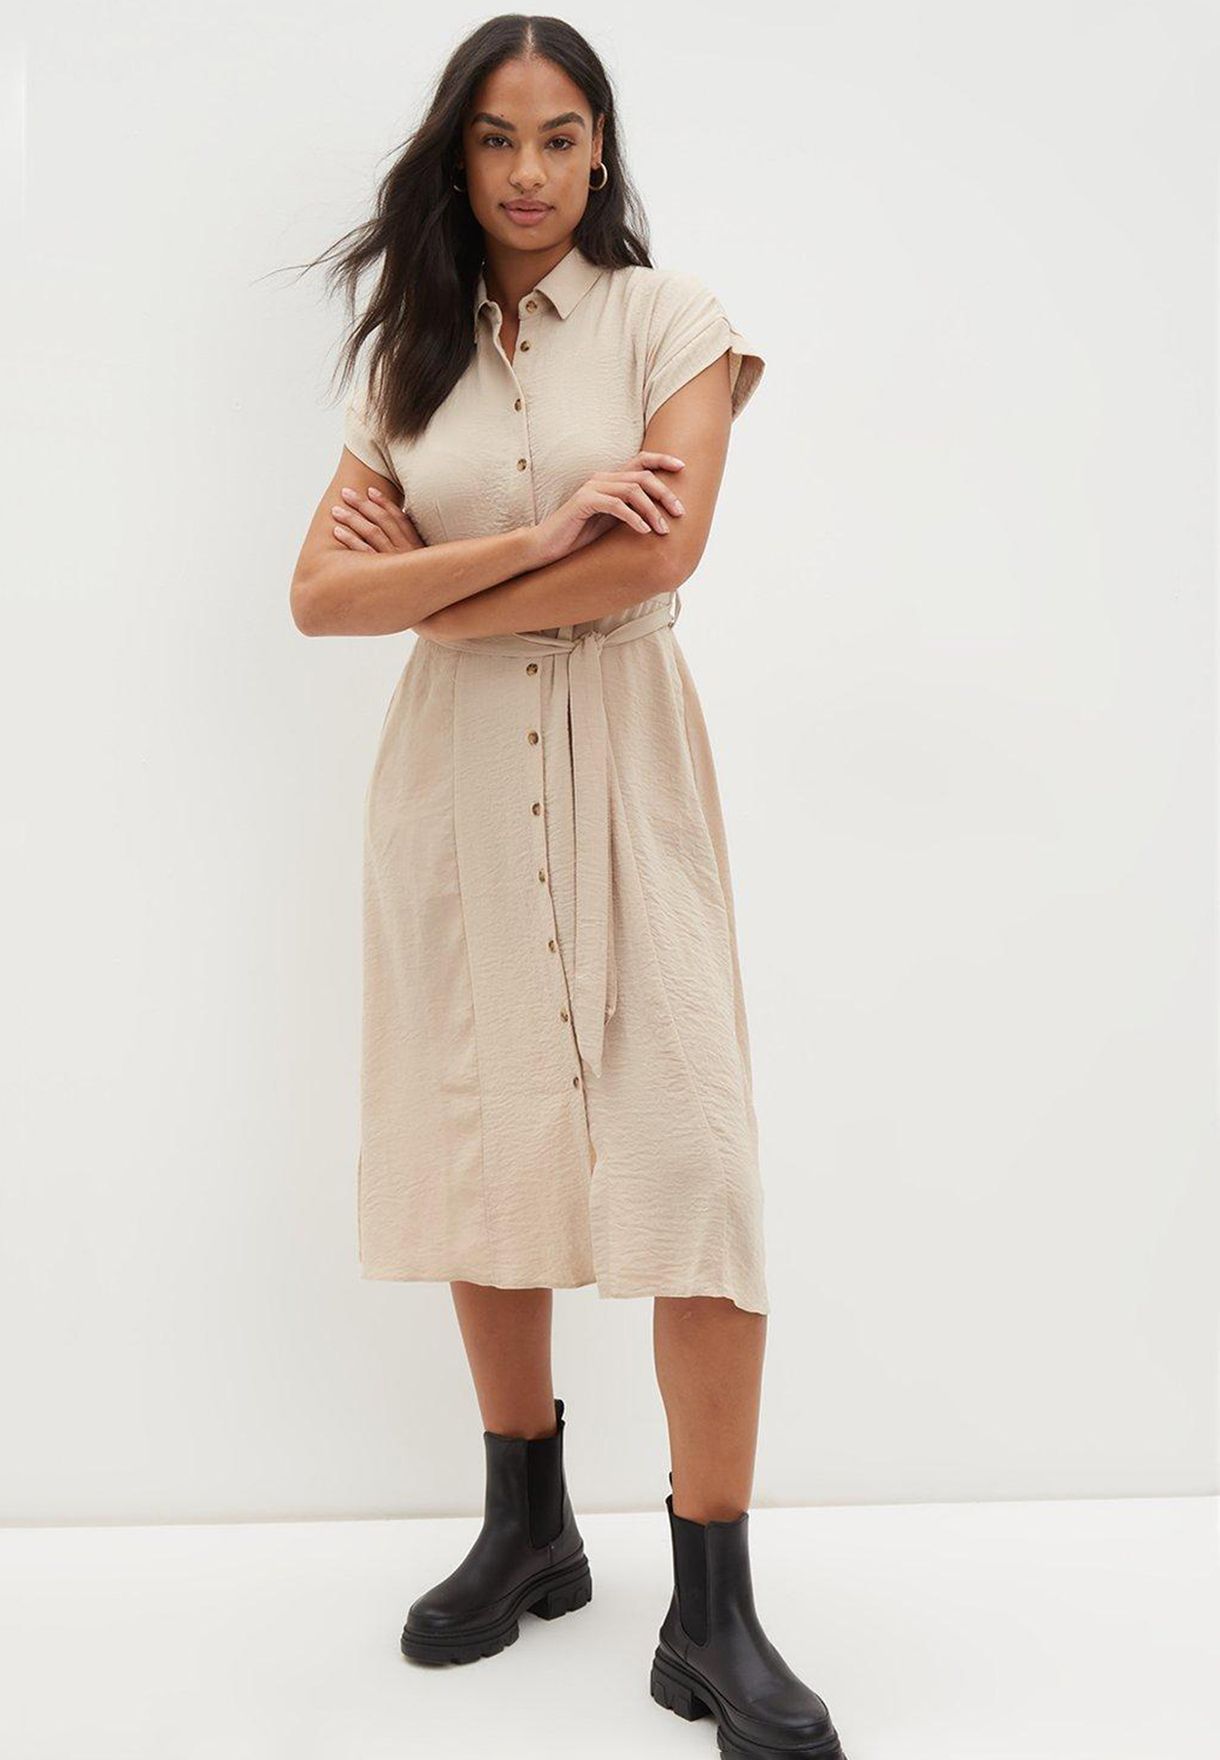 Belted Button Down Dress